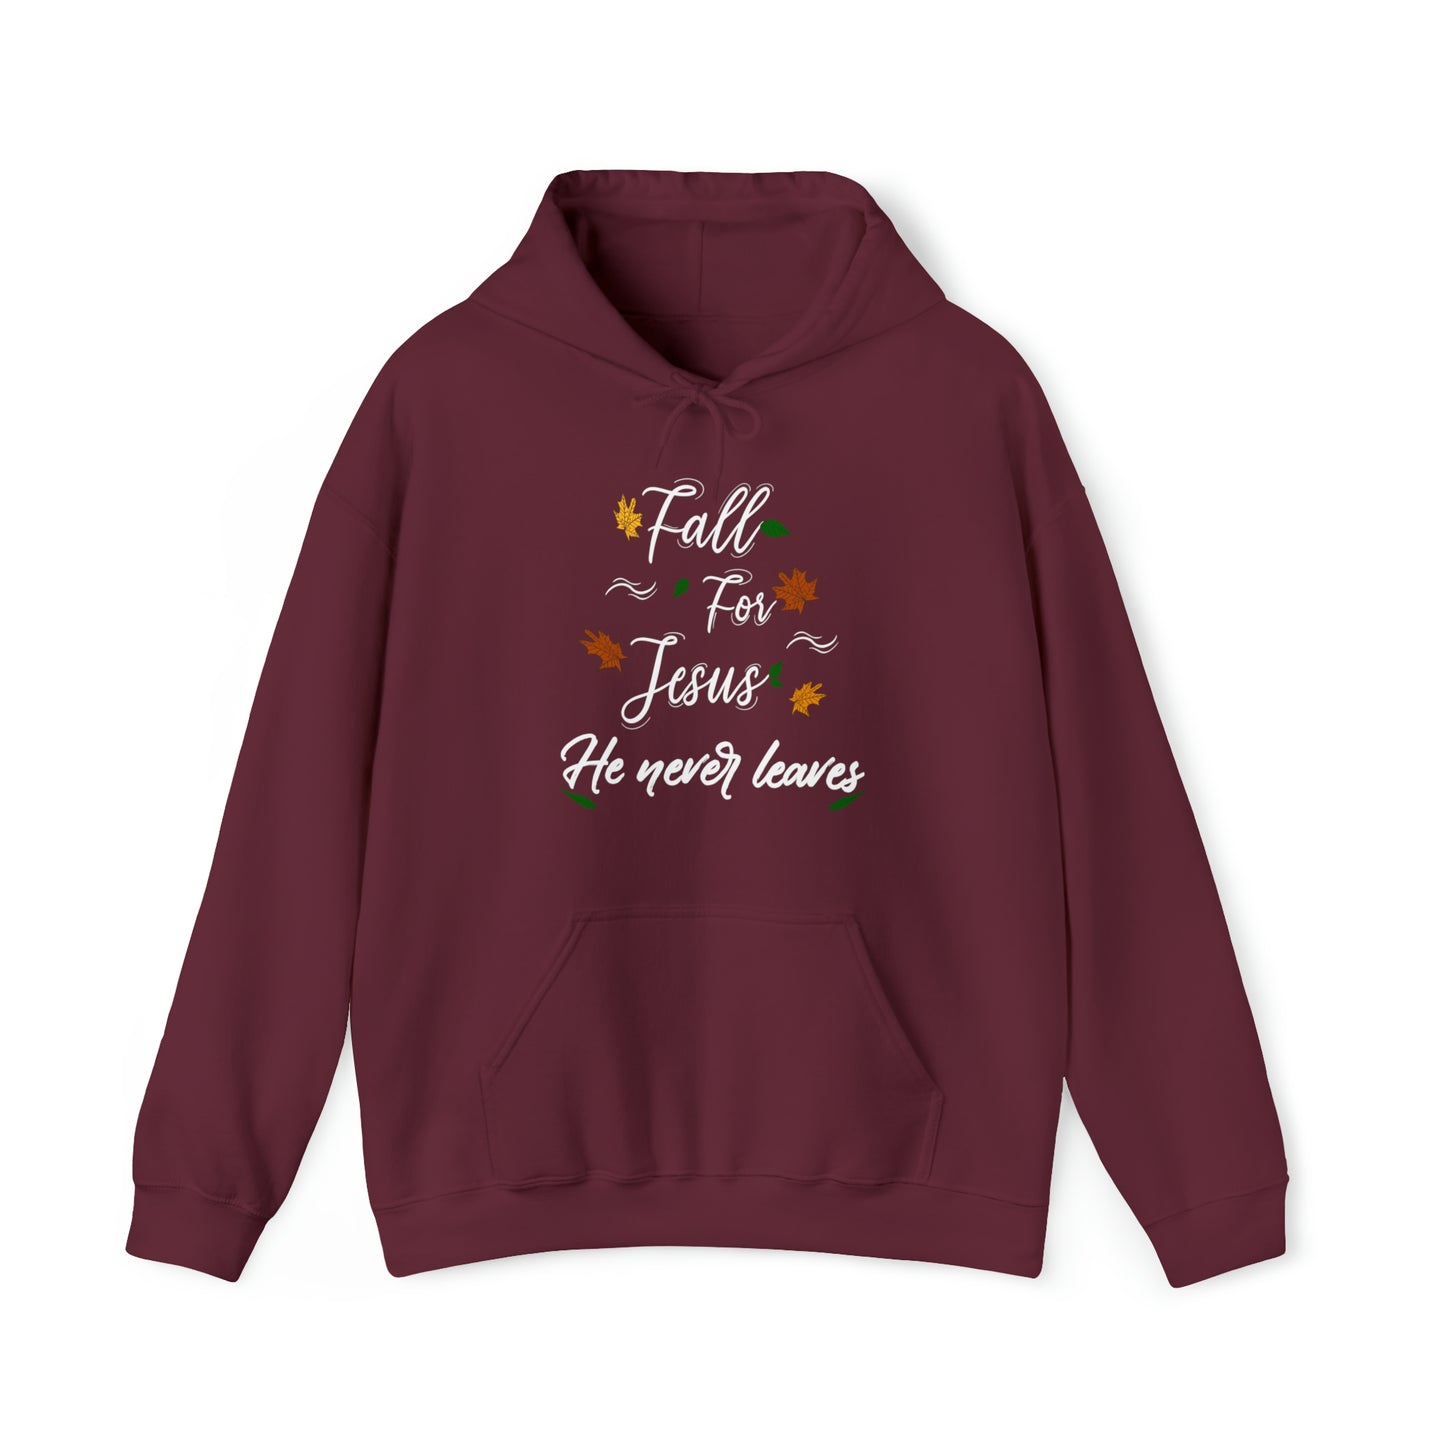 Fall For Jesus- Hooded Sweatshirt (Available in more colors)